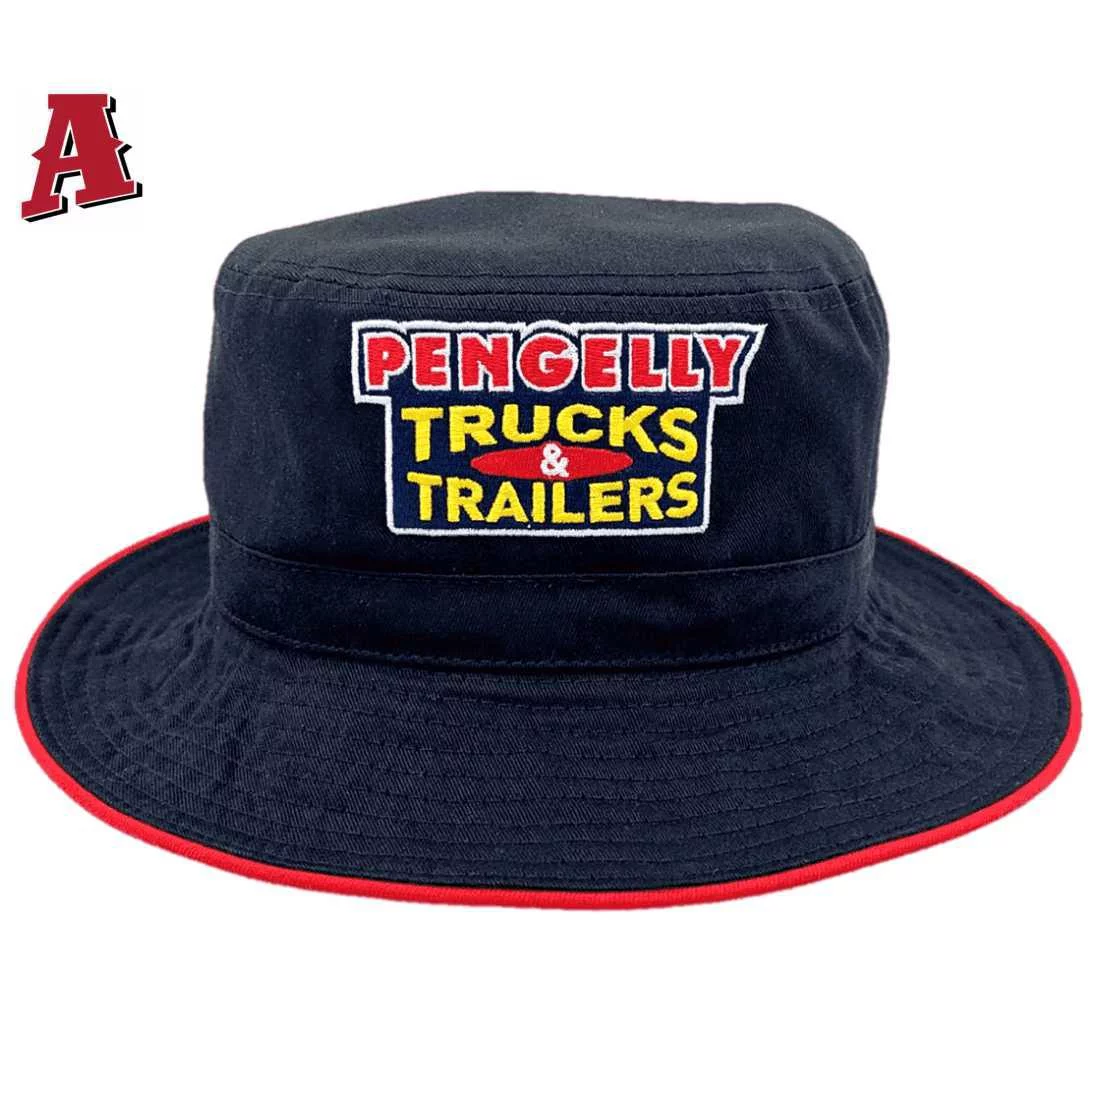 Pengelly Trucks and Trailers Toowoomba Qld Aussie Bucket Hats One Size Fits All with Optional Brim Width 5cm-7.5cm